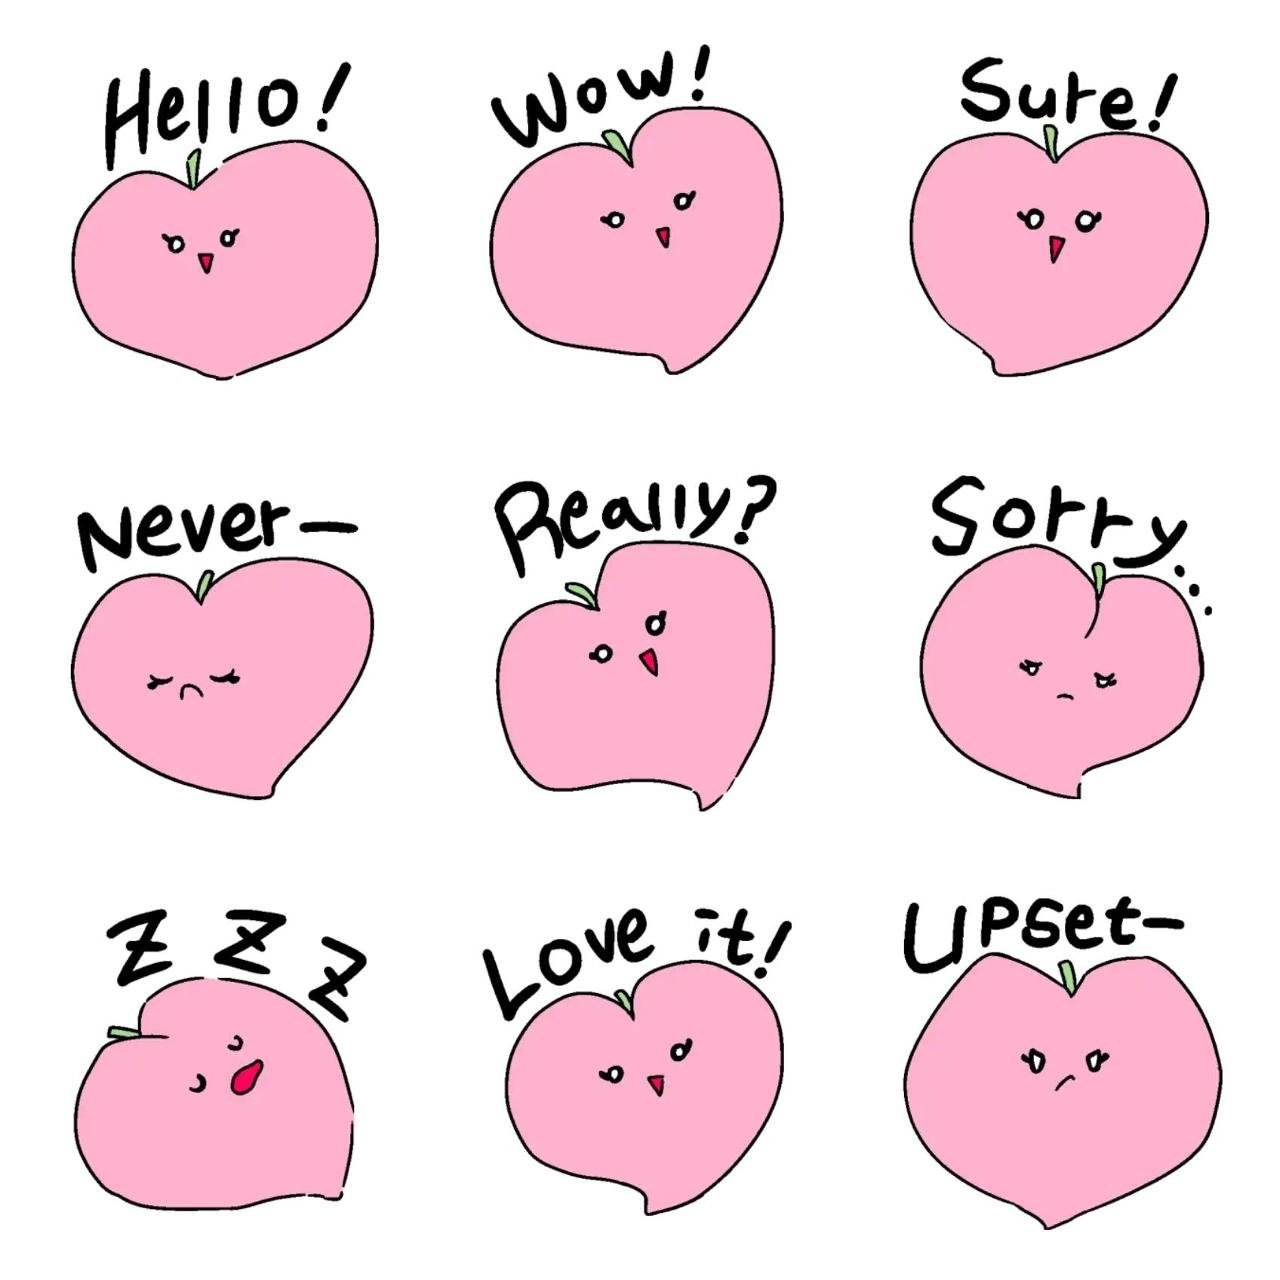 Pink peach Animation/Cartoon,Food/Drink sticker pack for Whatsapp, Telegram, Signal, and others chatting and message apps